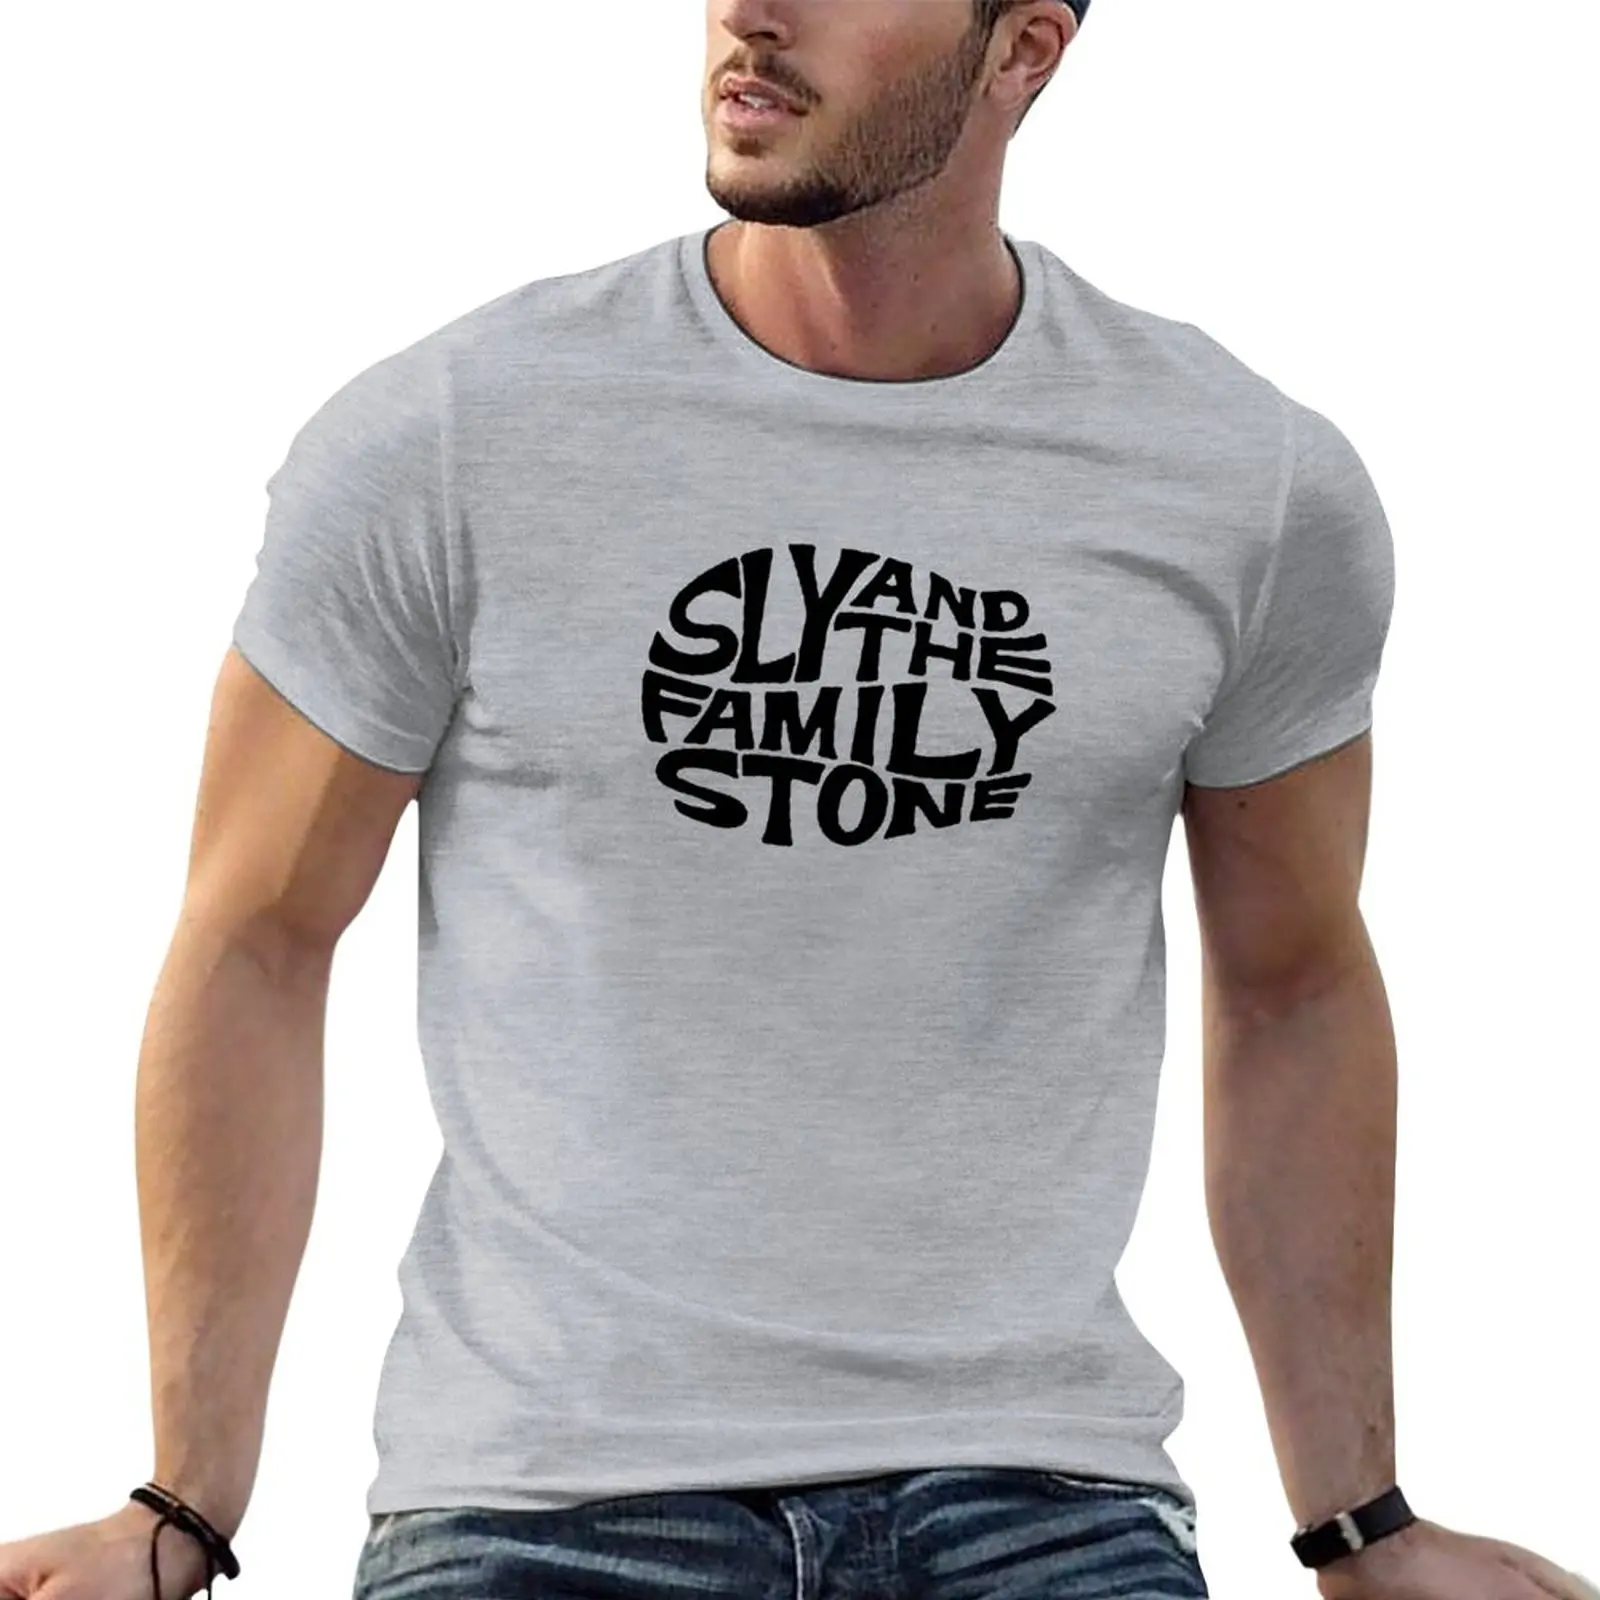 New Sly and the Family Stone T-Shirt summer tops cute tops shirts graphic tees black t-shirts for men skeleton motorcycle men t shirt handsome male o neck vintage clothes summer cool homme tees tops punk skull knight t shirts